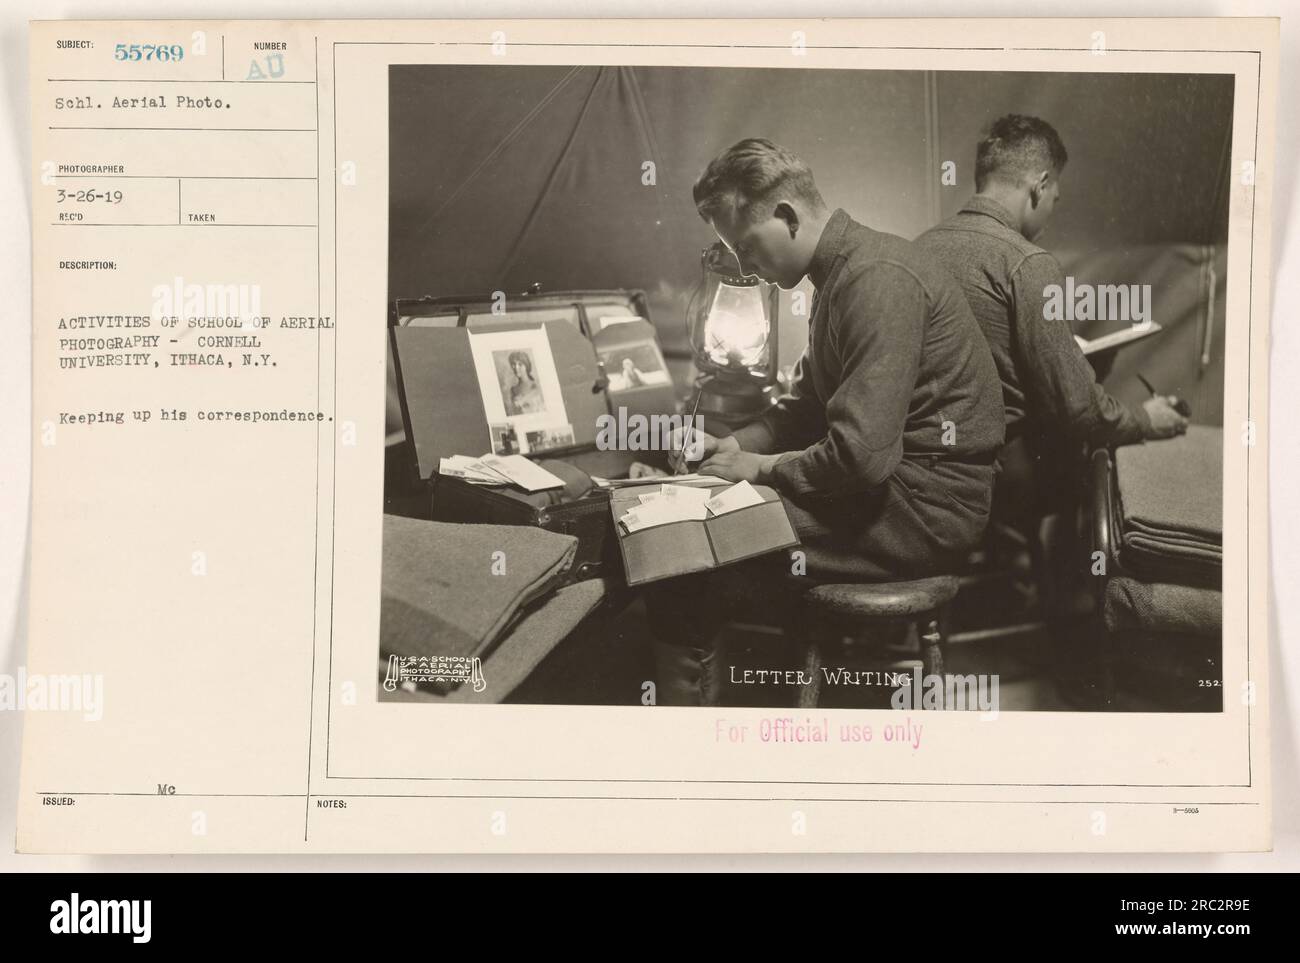 In this image from the Photographs of American Military Activities during World War One, a student at the School of Aerial Photography at Cornell University in Ithaca, N.Y., is seen keeping up with his correspondence. The photo was taken on March 26, 1919, as part of a series documenting the school's activities. The image is labeled as Subject 55769 Schl. Aerial Photo and was taken by Photographer 3-26-19 Reco. The description emphasizes the letter writing activities of the school, with the note that it is for official use only. Stock Photo